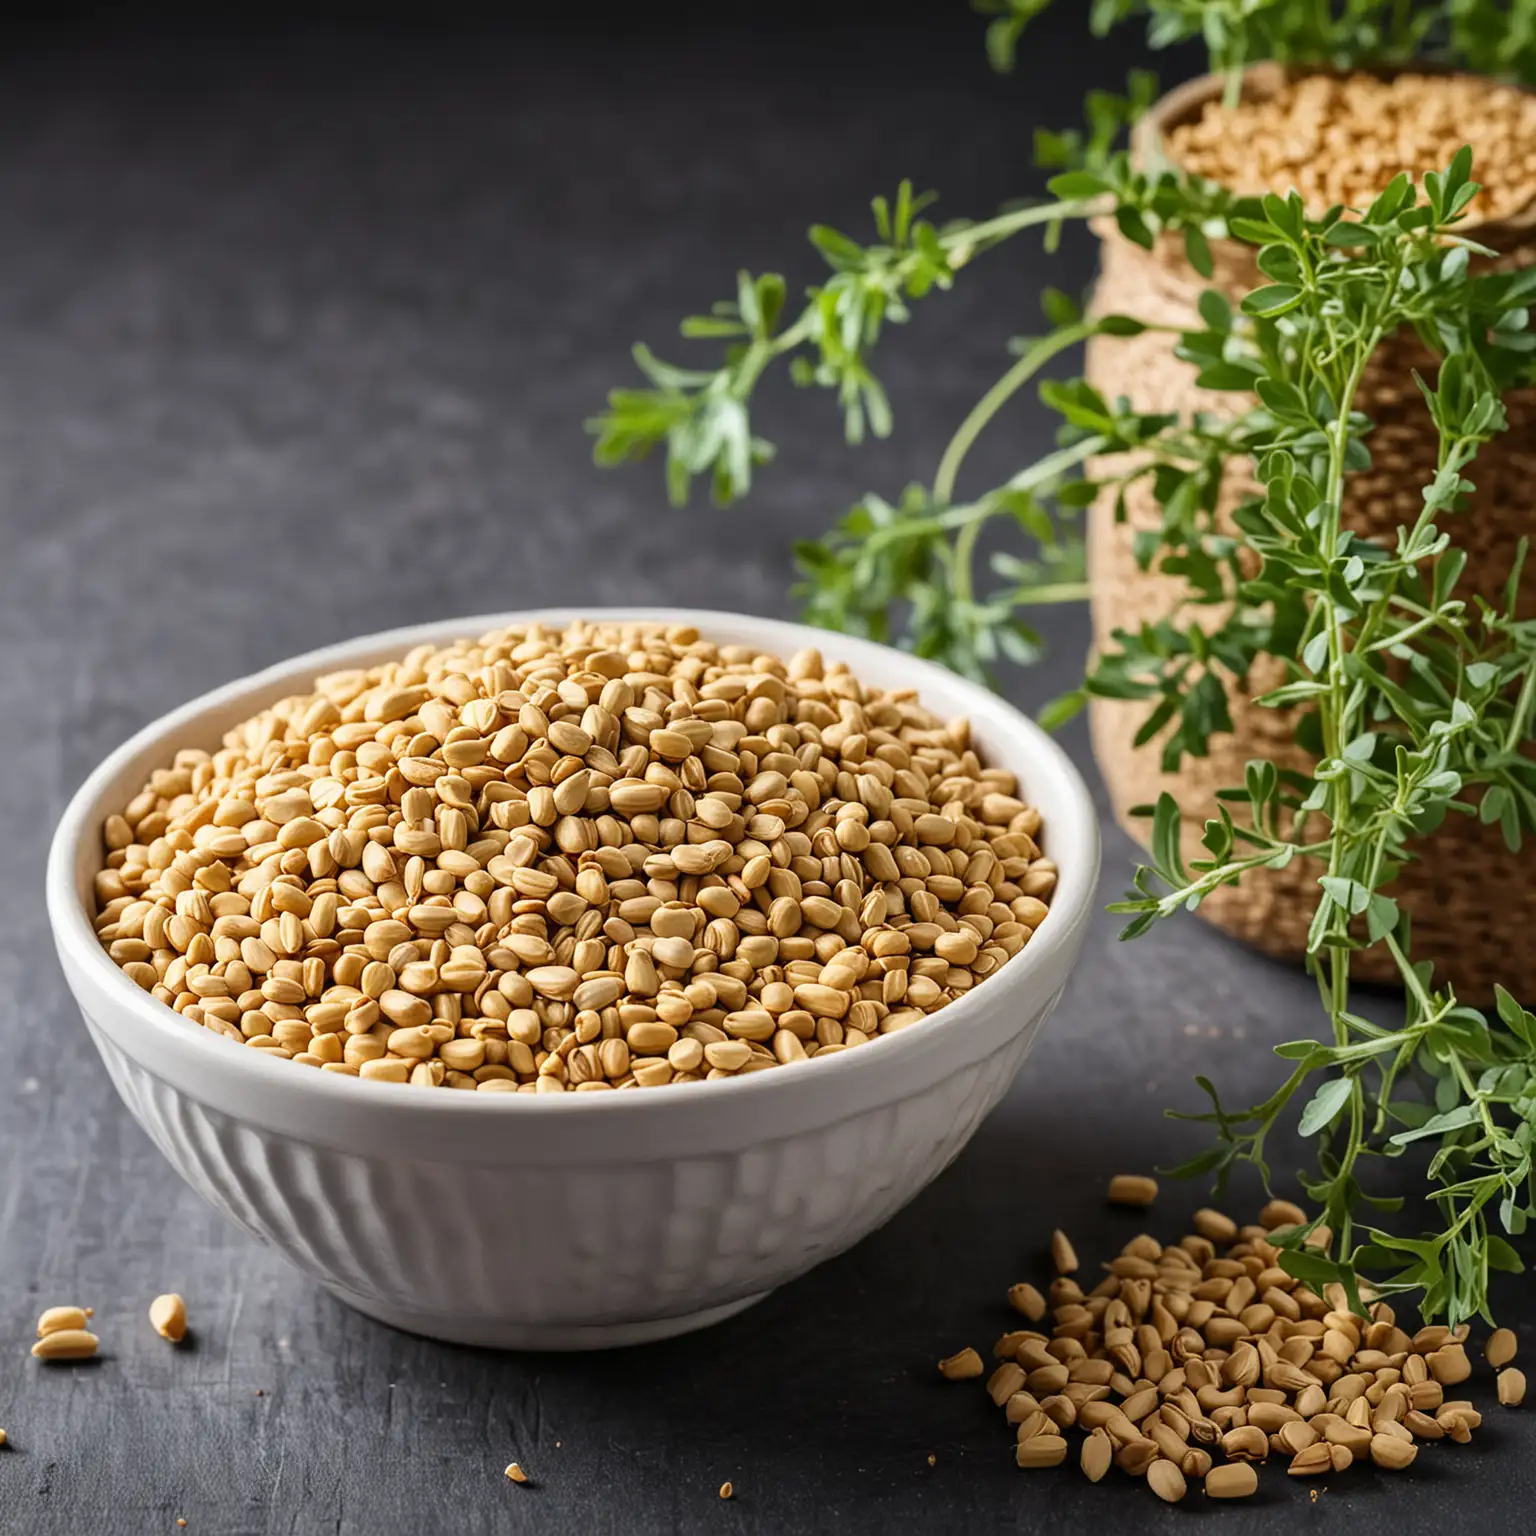 fenugreek seeds in a bowl with the plant in the background
